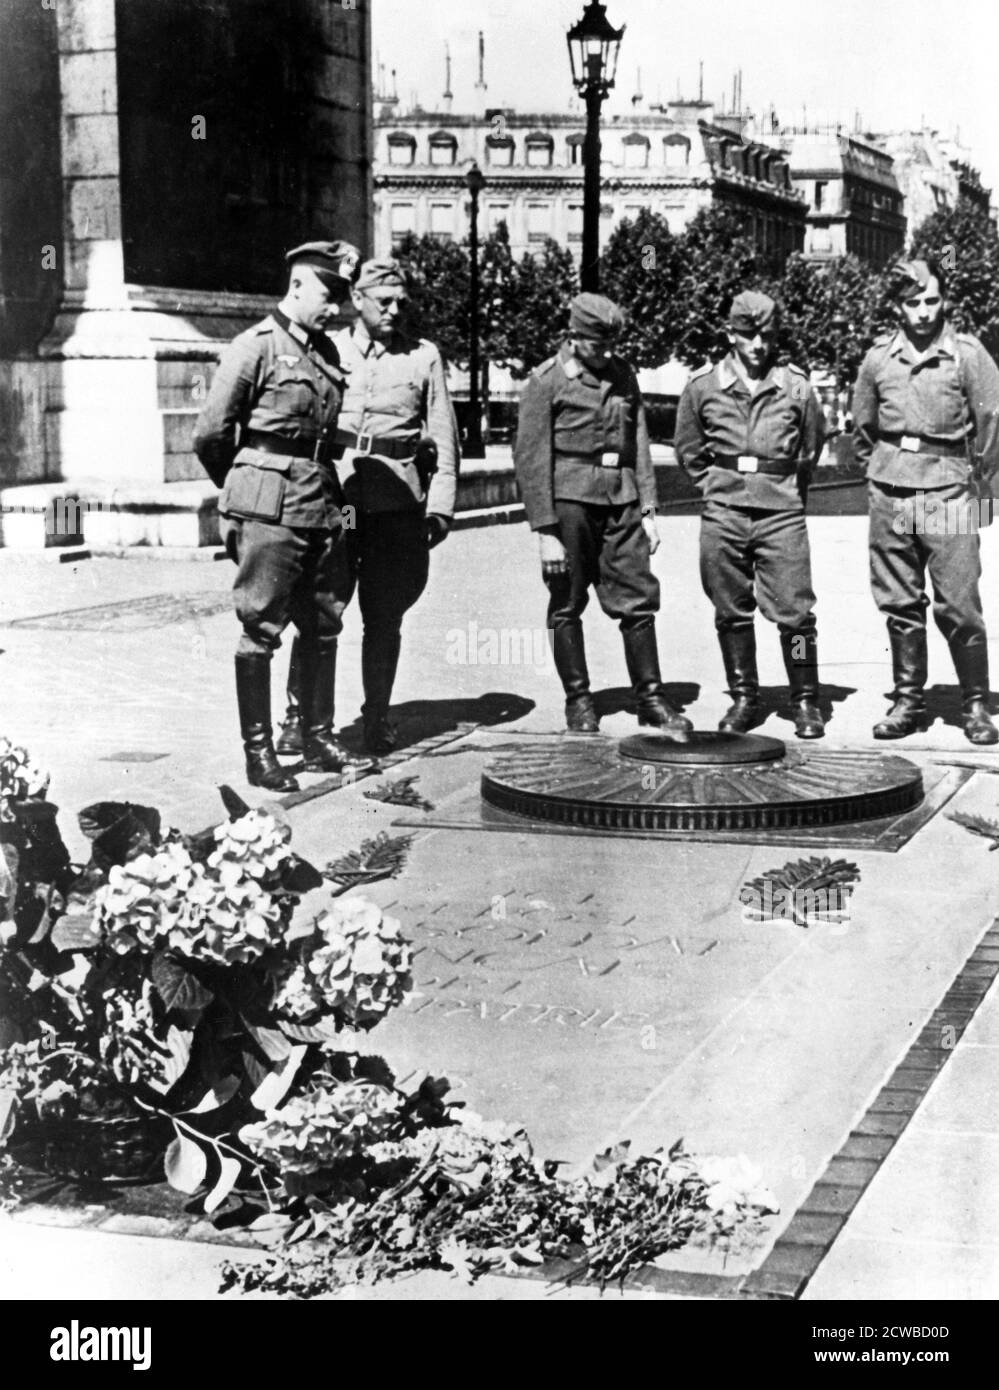 German soldiers at the Tomb of the Unknown Soldier at the Arc de Triomphe, Paris, December 1940. The photographer is unknown. Stock Photo